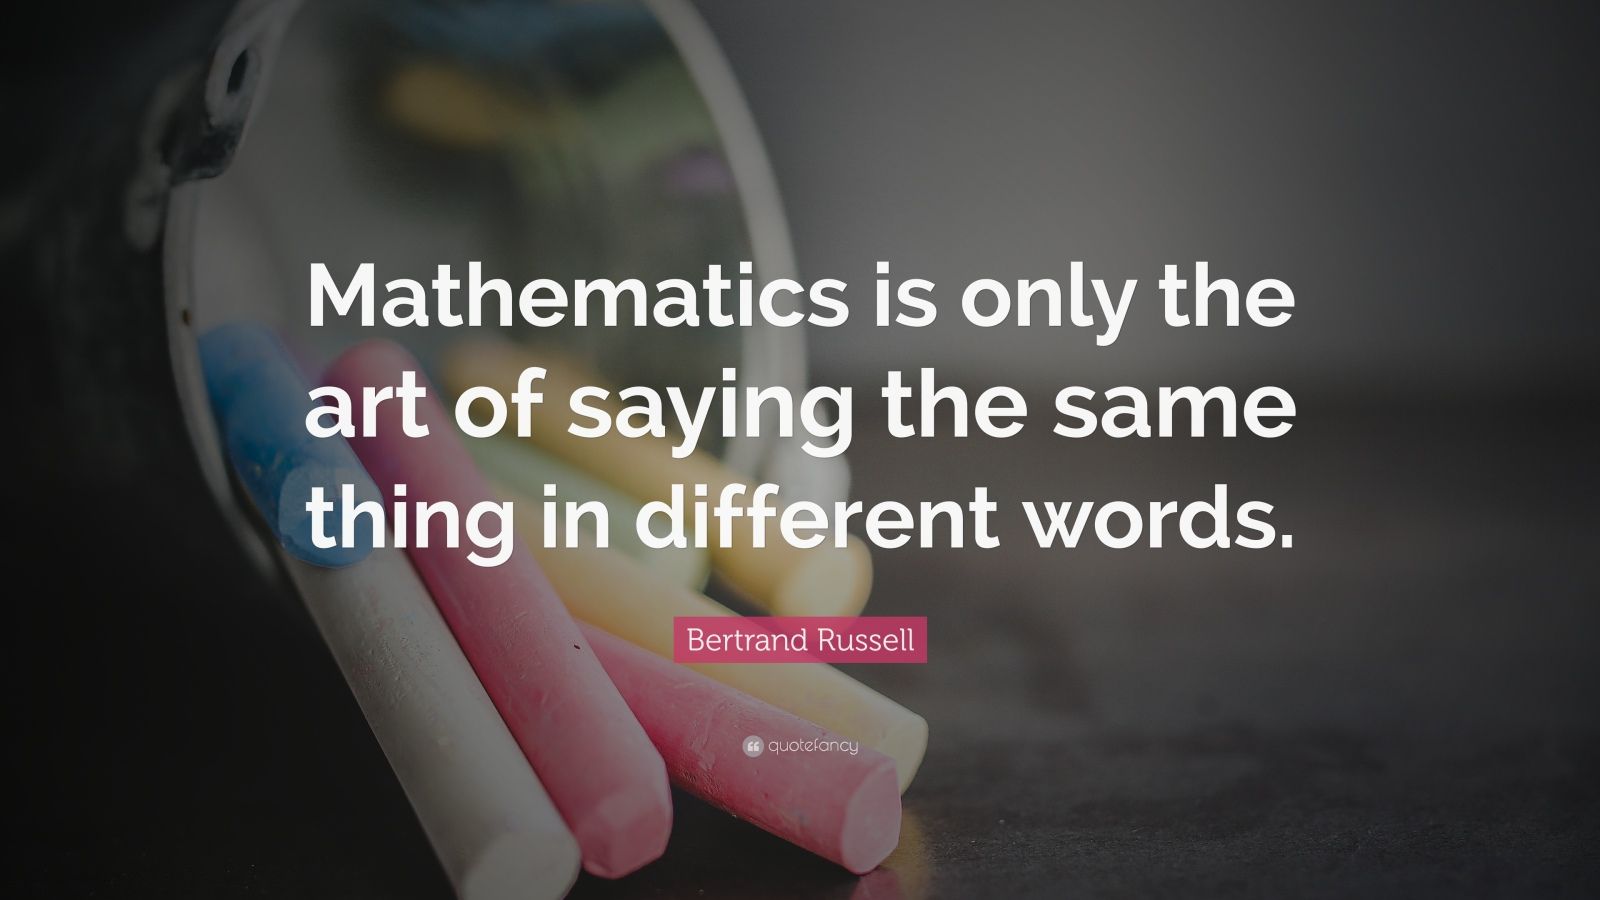 Bertrand Russell Quote: “Mathematics is only the art of saying the same